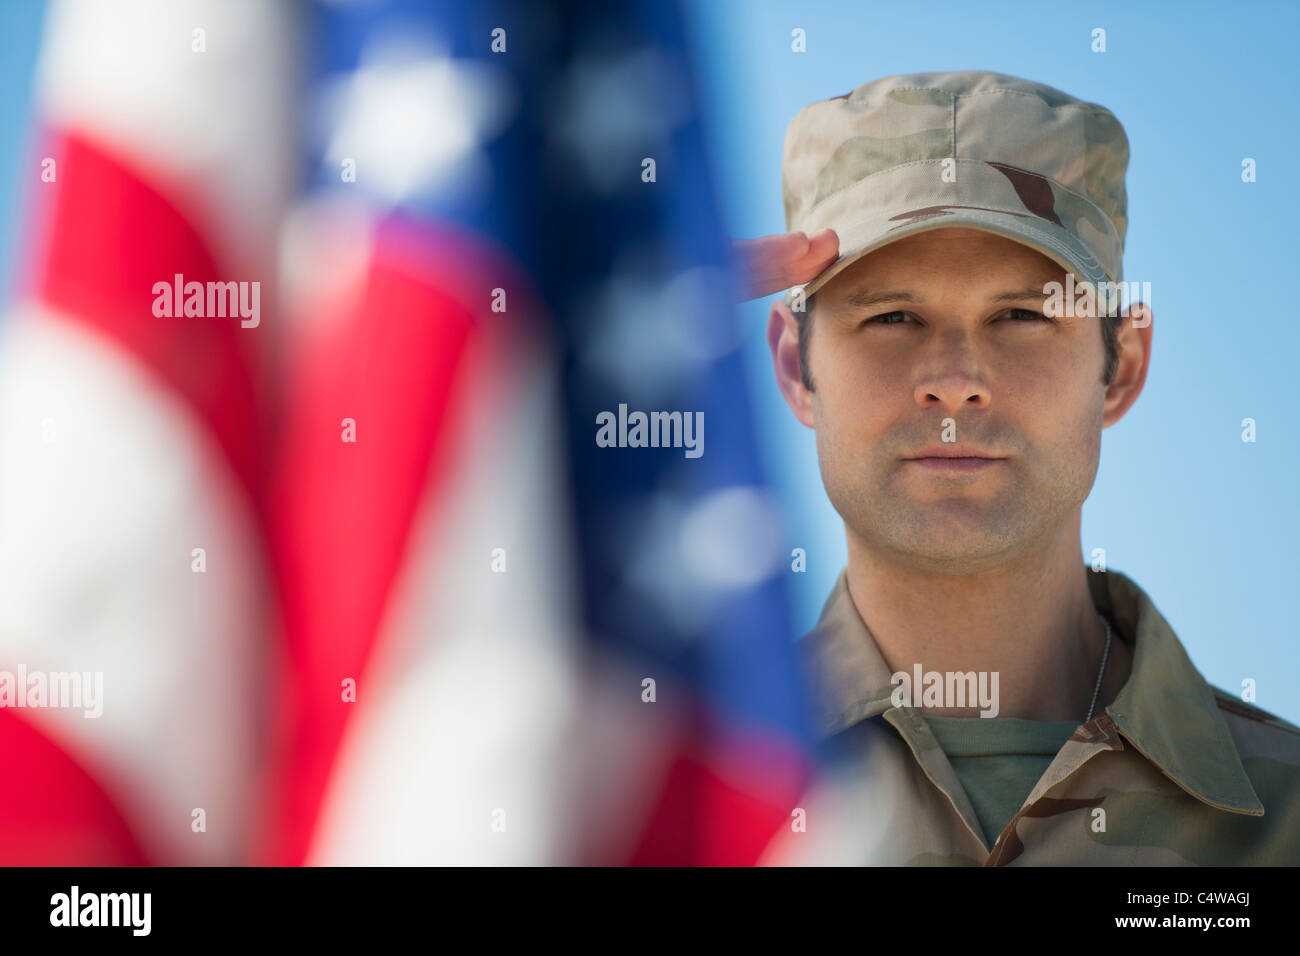 USA, New Jersey, Jersey City, saluting US army soldier Stock Photo